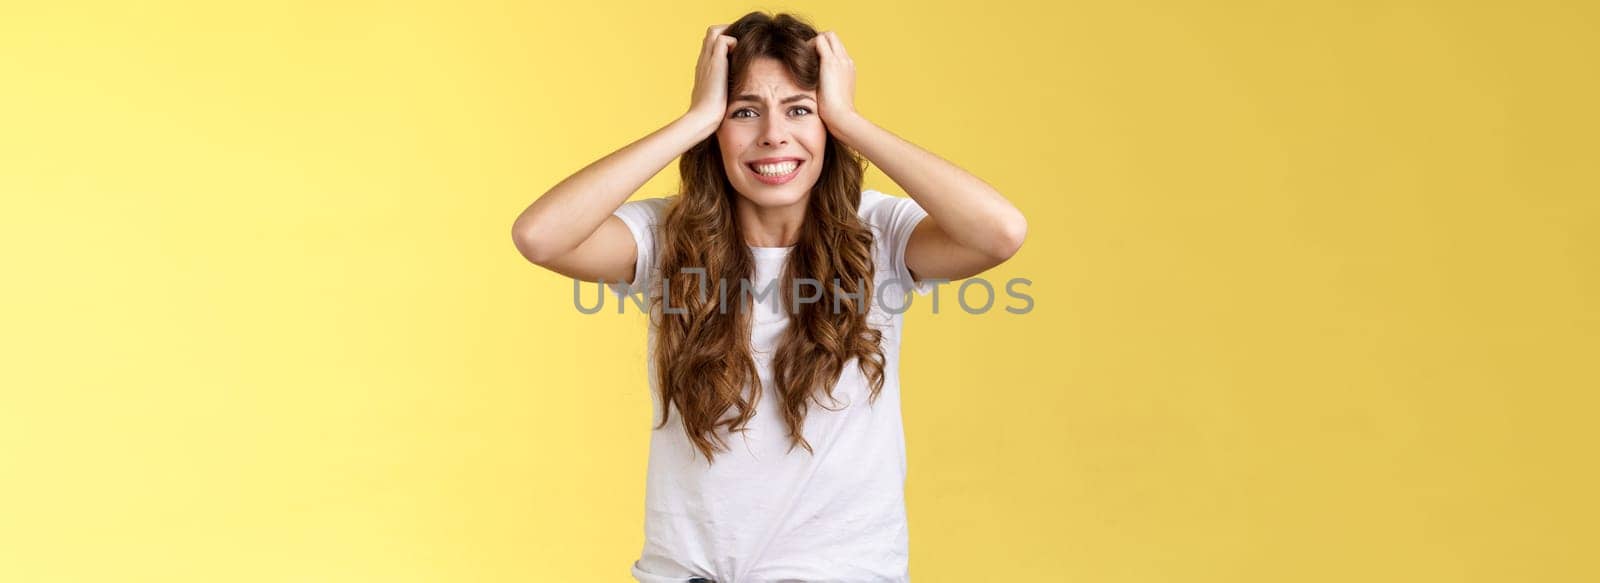 Girl panicking huge trouble suffer panic-attack grimacing painful feelings inside hold hands head troubled frustrated frowning anxiously staring camera troublesome problematic situation by Benzoix